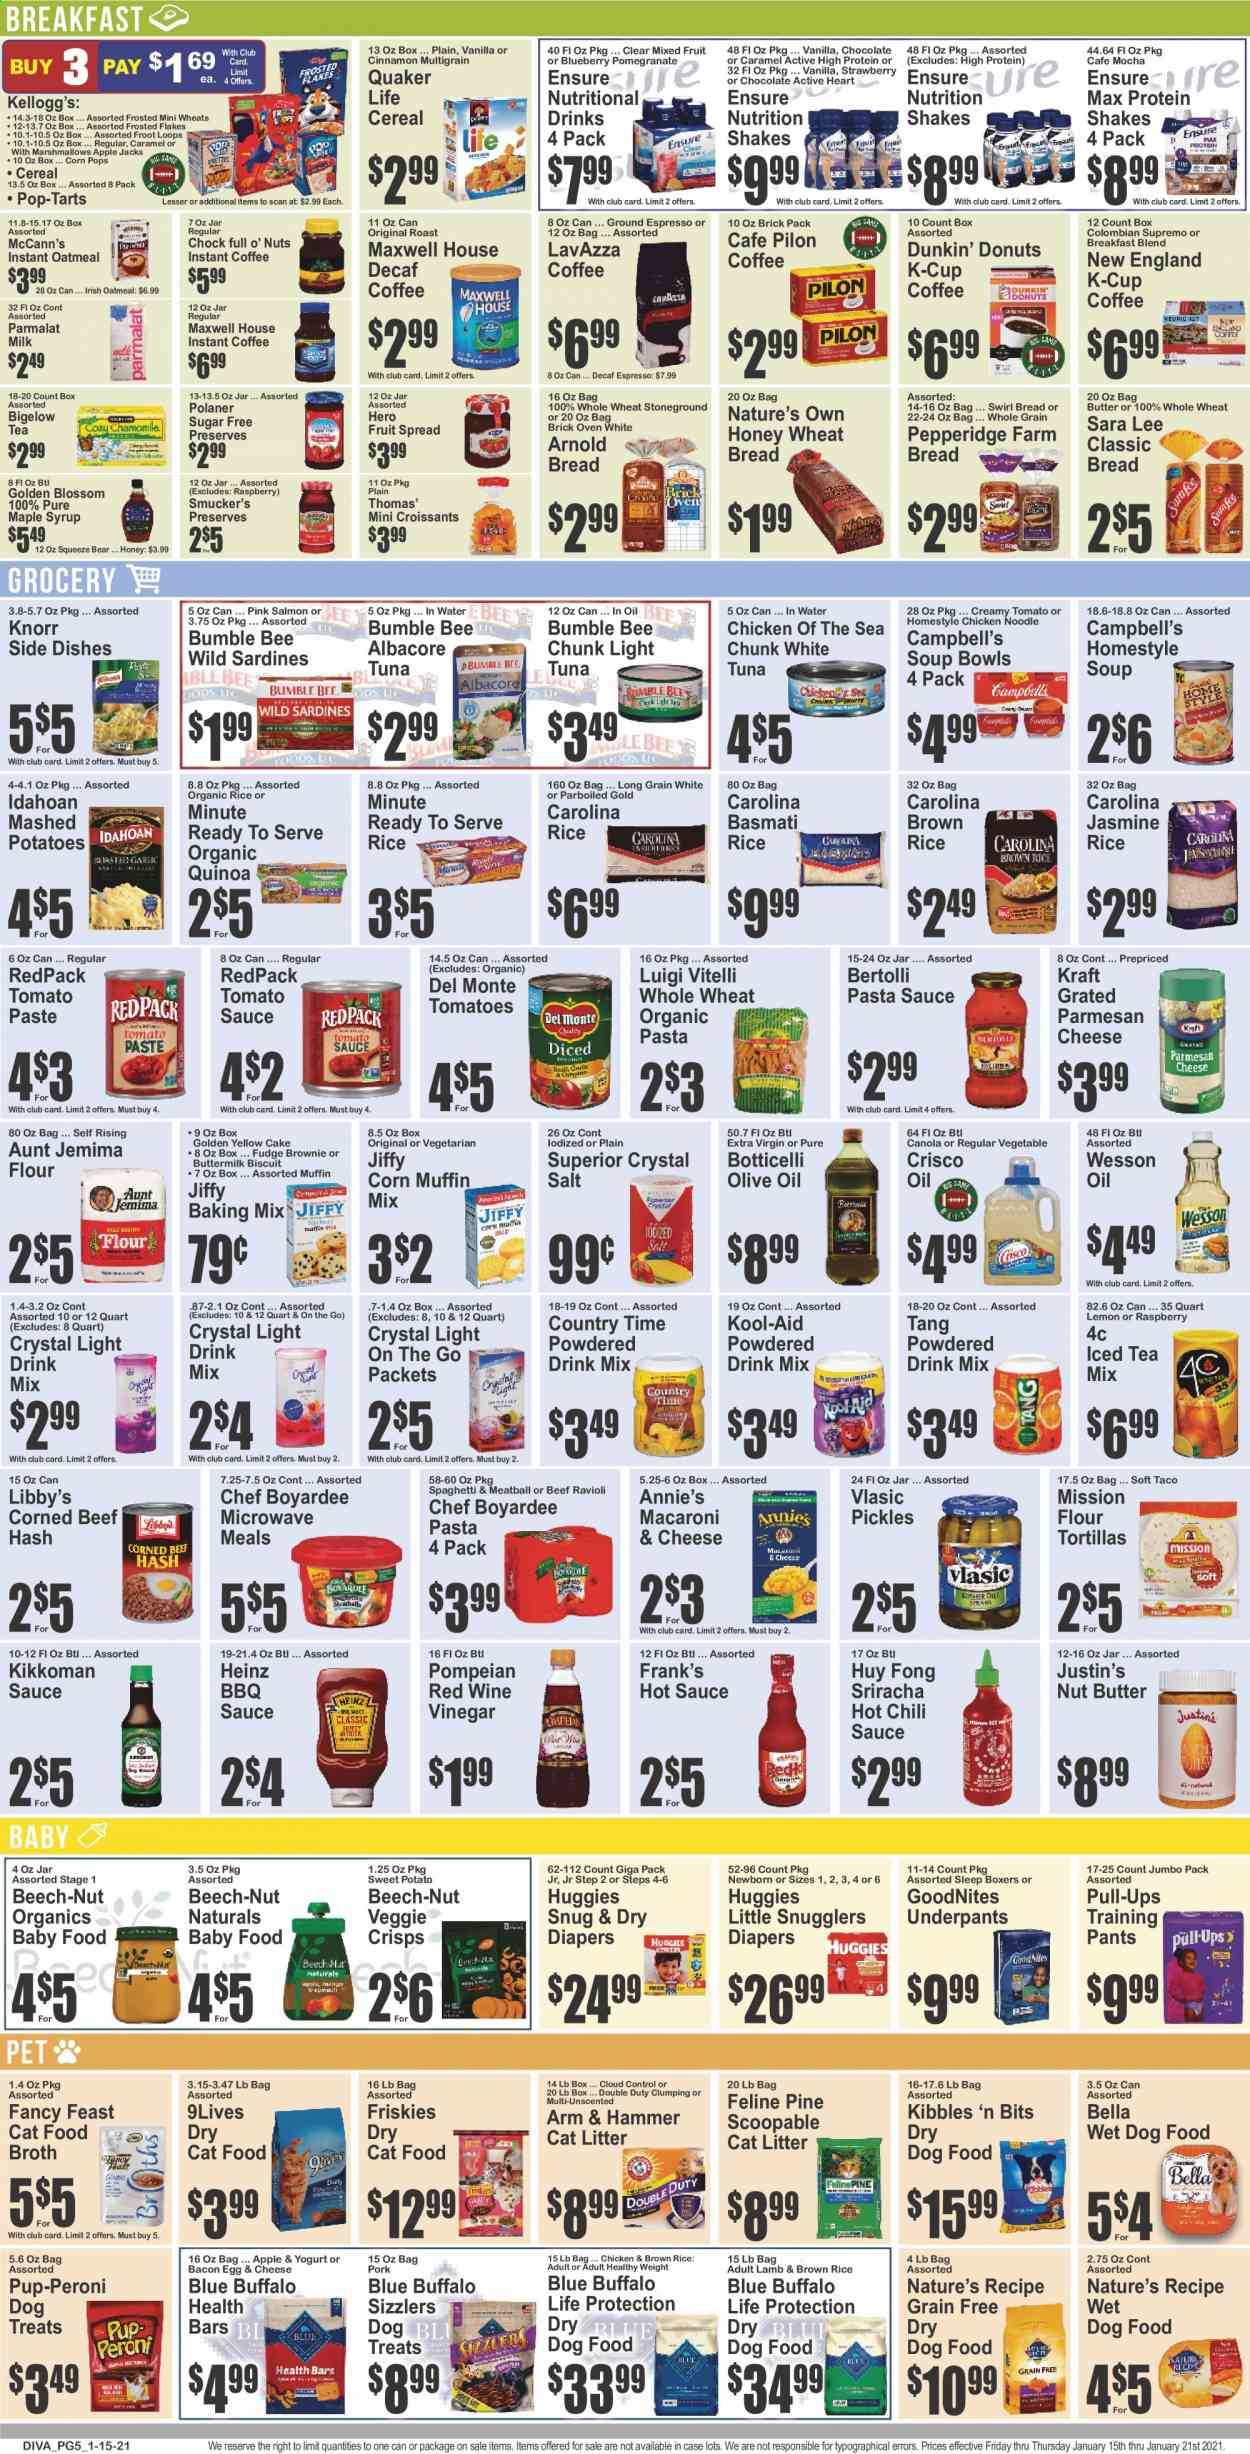 thumbnail - Key Food Flyer - 01/15/2021 - 01/21/2021 - Sales products - tortillas, wheat bread, Sara Lee, cake, brownies, donut, muffin, Dunkin' Donuts, salmon, sardines, tuna, beef hash, Campbell's, macaroni & cheese, mashed potatoes, soup, Knorr, Quaker, Annie's, Kraft®, Bertolli, bacon, parmesan, yoghurt, Parmalat, buttermilk, protein drink, shake, eggs, Blossom, sweet potato, pickles, fudge, marshmallows, chocolate, Kellogg's, biscuit, Pop-Tarts, ARM & HAMMER, Crisco, oatmeal, salt, broth, corn muffin, tomato paste, Heinz, light tuna, Chicken of the Sea, Chef Boyardee, cereals, Frosted Flakes, Corn Pops, basmati rice, brown rice, quinoa, ravioli, spaghetti, jasmine rice, noodles, cinnamon, BBQ sauce, sriracha, tomato sauce, hot sauce, pasta sauce, chilli sauce, Kikkoman, extra virgin olive oil, vinegar, wine vinegar, olive oil, maple syrup, syrup, nut butter, Country Time, Maxwell House, instant coffee, coffee capsules, K-Cups, Lavazza, breakfast blend, beef meat, corned beef, Huggies, baby pants, Bella, cat litter, animal food, Blue Buffalo, cat food, dog food, wet dog food, 9lives, dry dog food, dry cat food, Pup-Peroni, Fancy Feast, Friskies, pants, Lee, Jiffy, Nature's Own. Page 6.